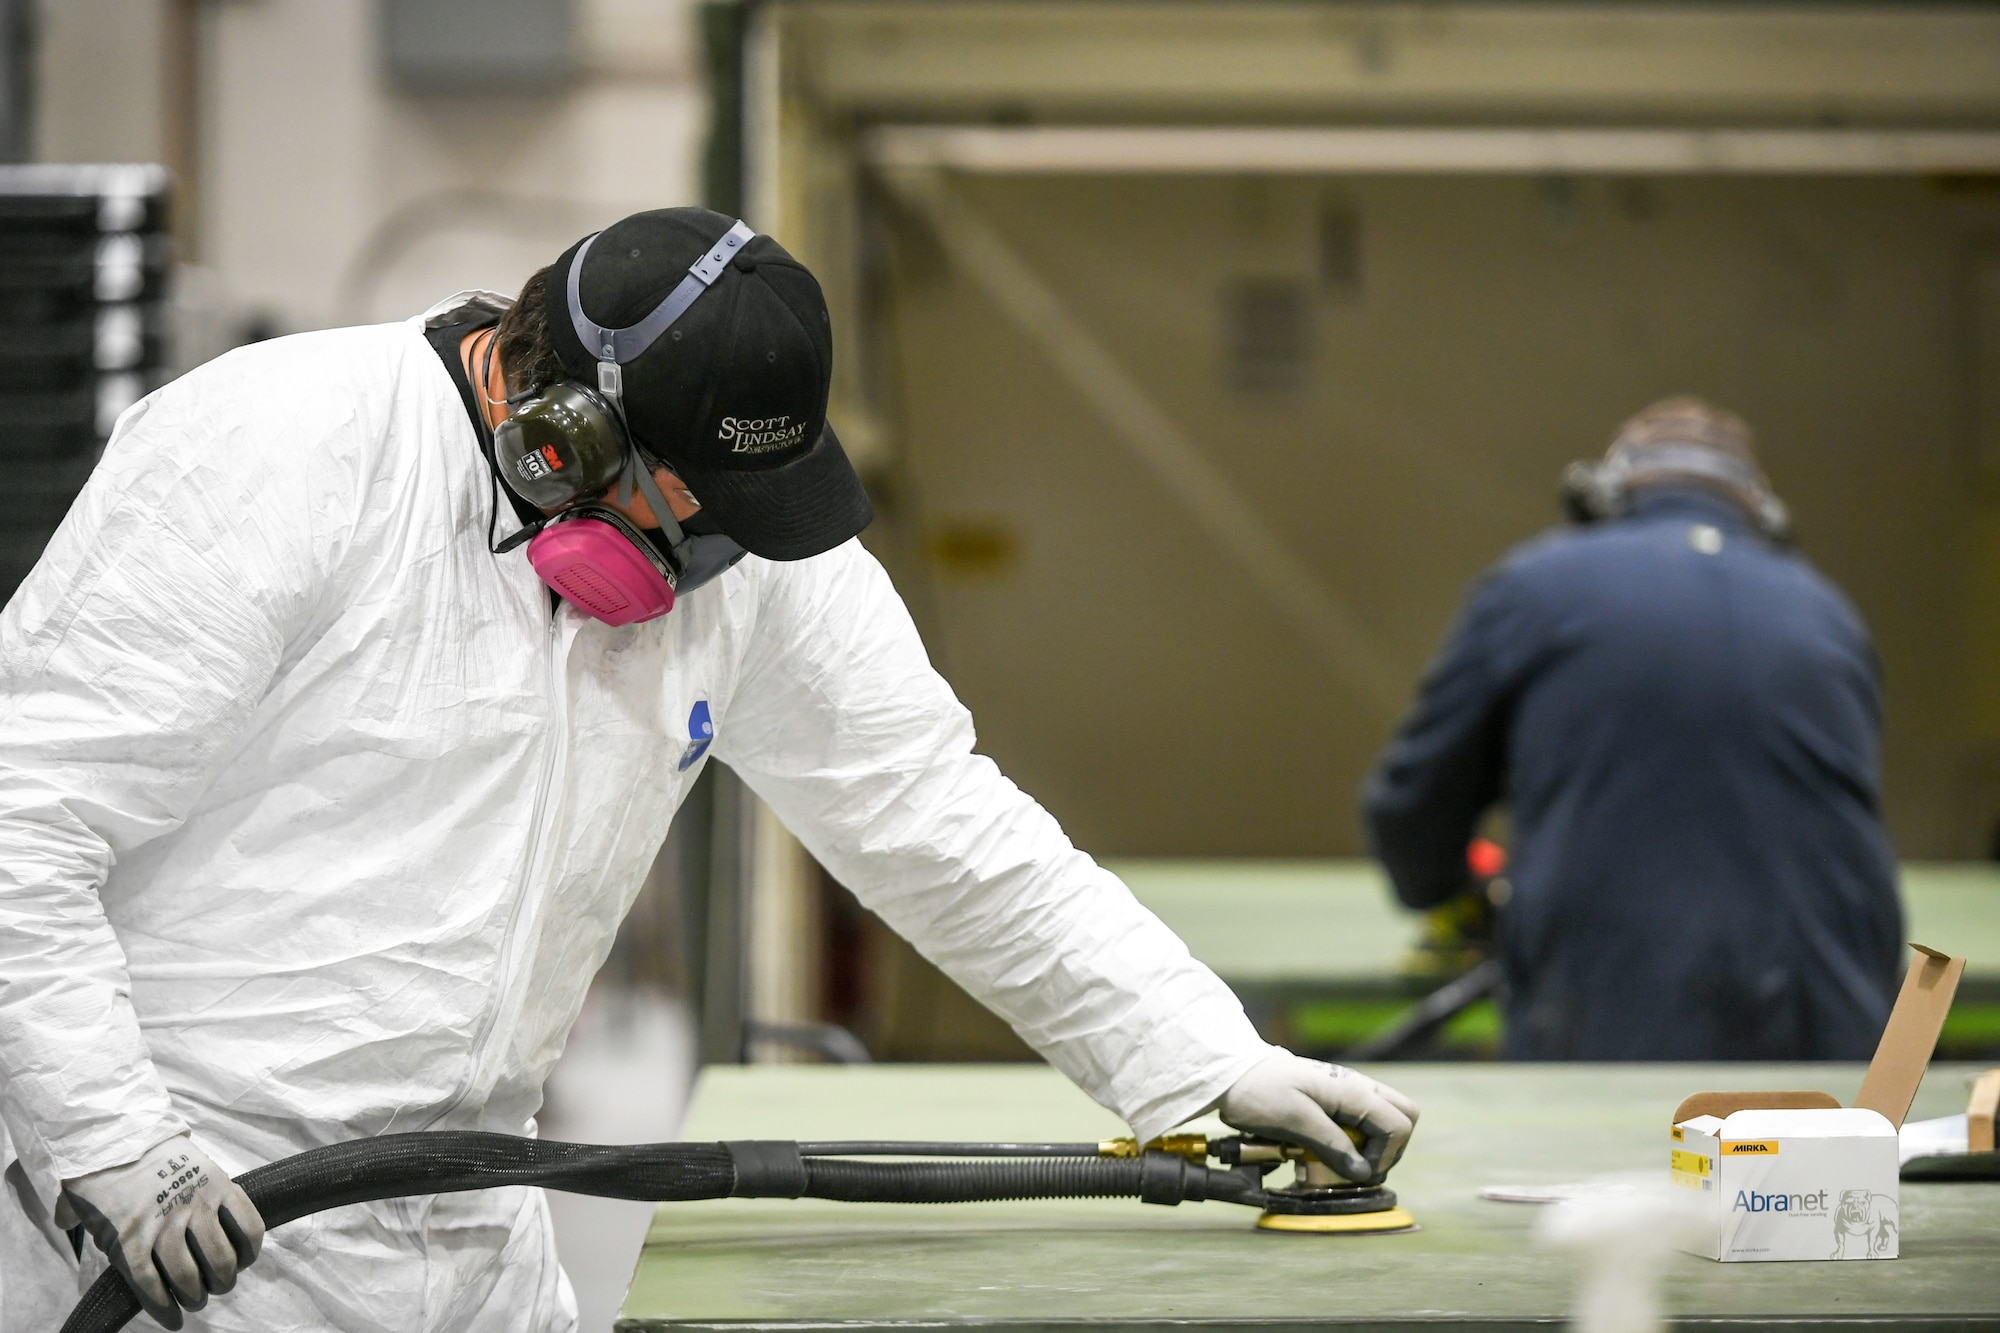 Two workers in the 309th Electronics Maintenance Group sand out walls for a tactical shelter April 29, 2020, at Hill Air Force Base, Utah. The 309th EMXG in the Ogden Air Logistics Complex provides repair and overhaul for exchangeable assets for a multitude of systems on a wide assortment of Air Force weapons systems including fighter aircraft, intercontinental ballistic missiles, powered aerospace ground equipment, tactical shelters, as well as refurbishment of radomes worldwide. (U.S. Air Force photo by Cynthia Griggs)